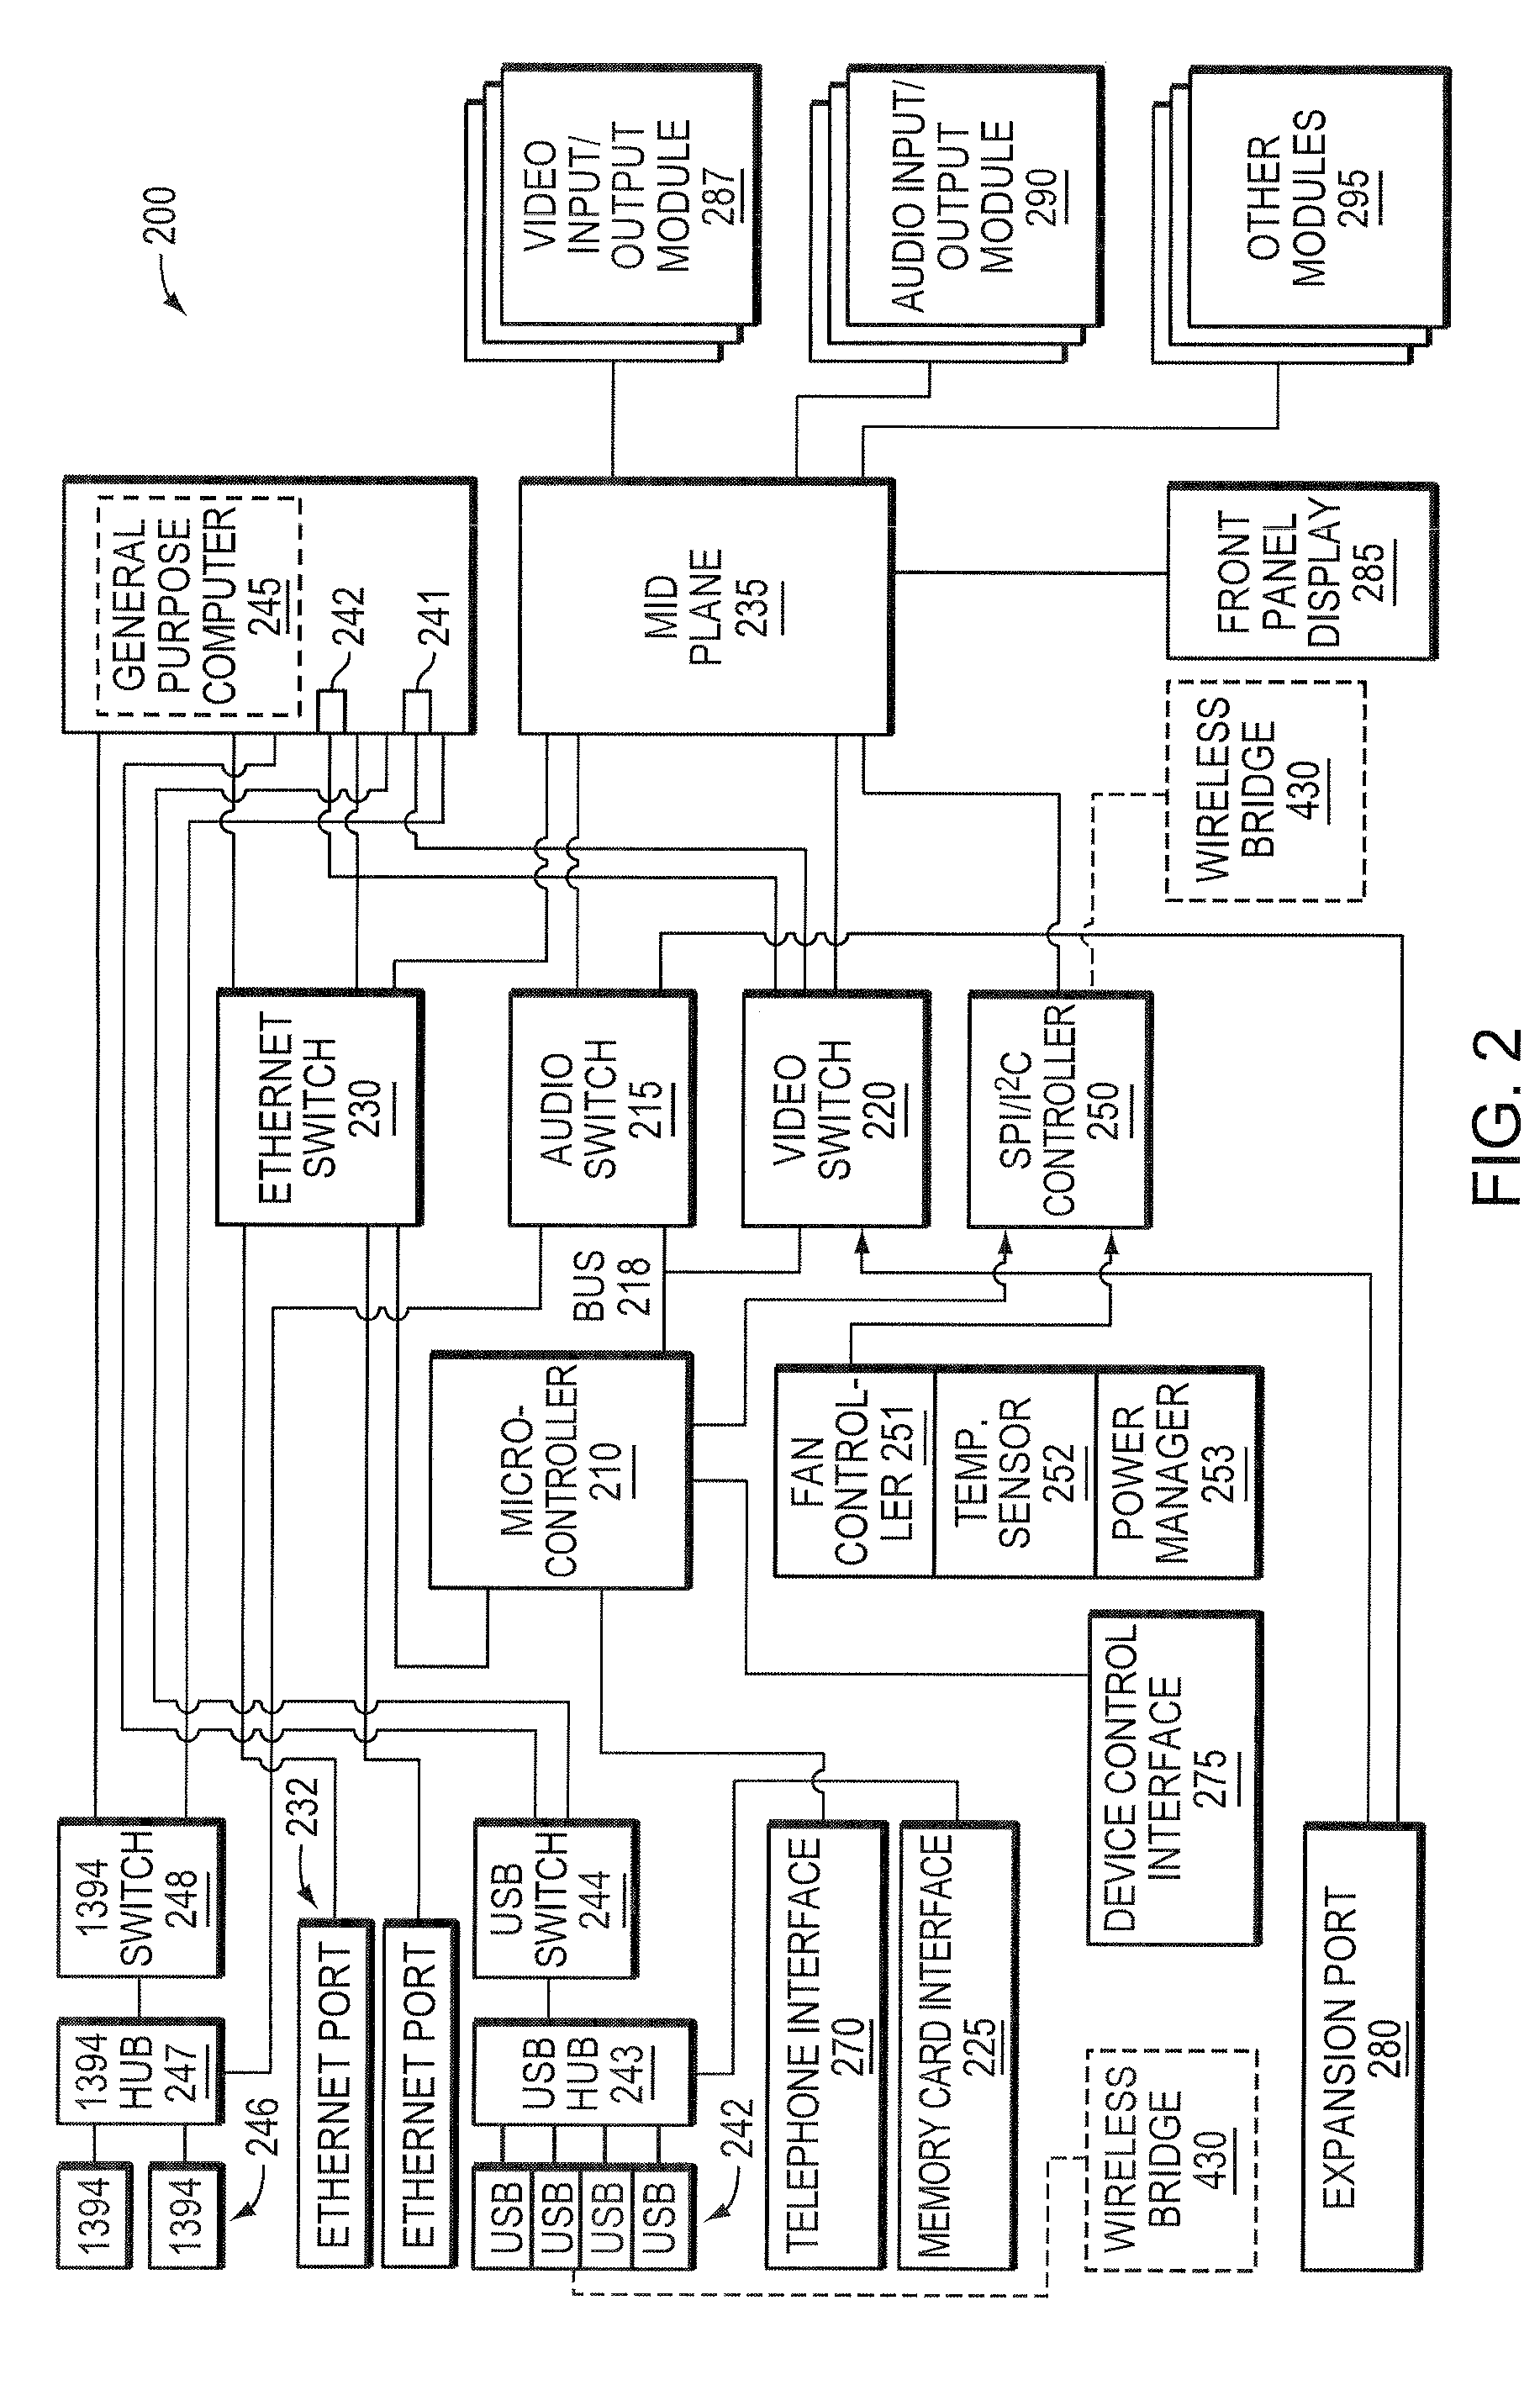 Location-based sharing of multimedia control resources